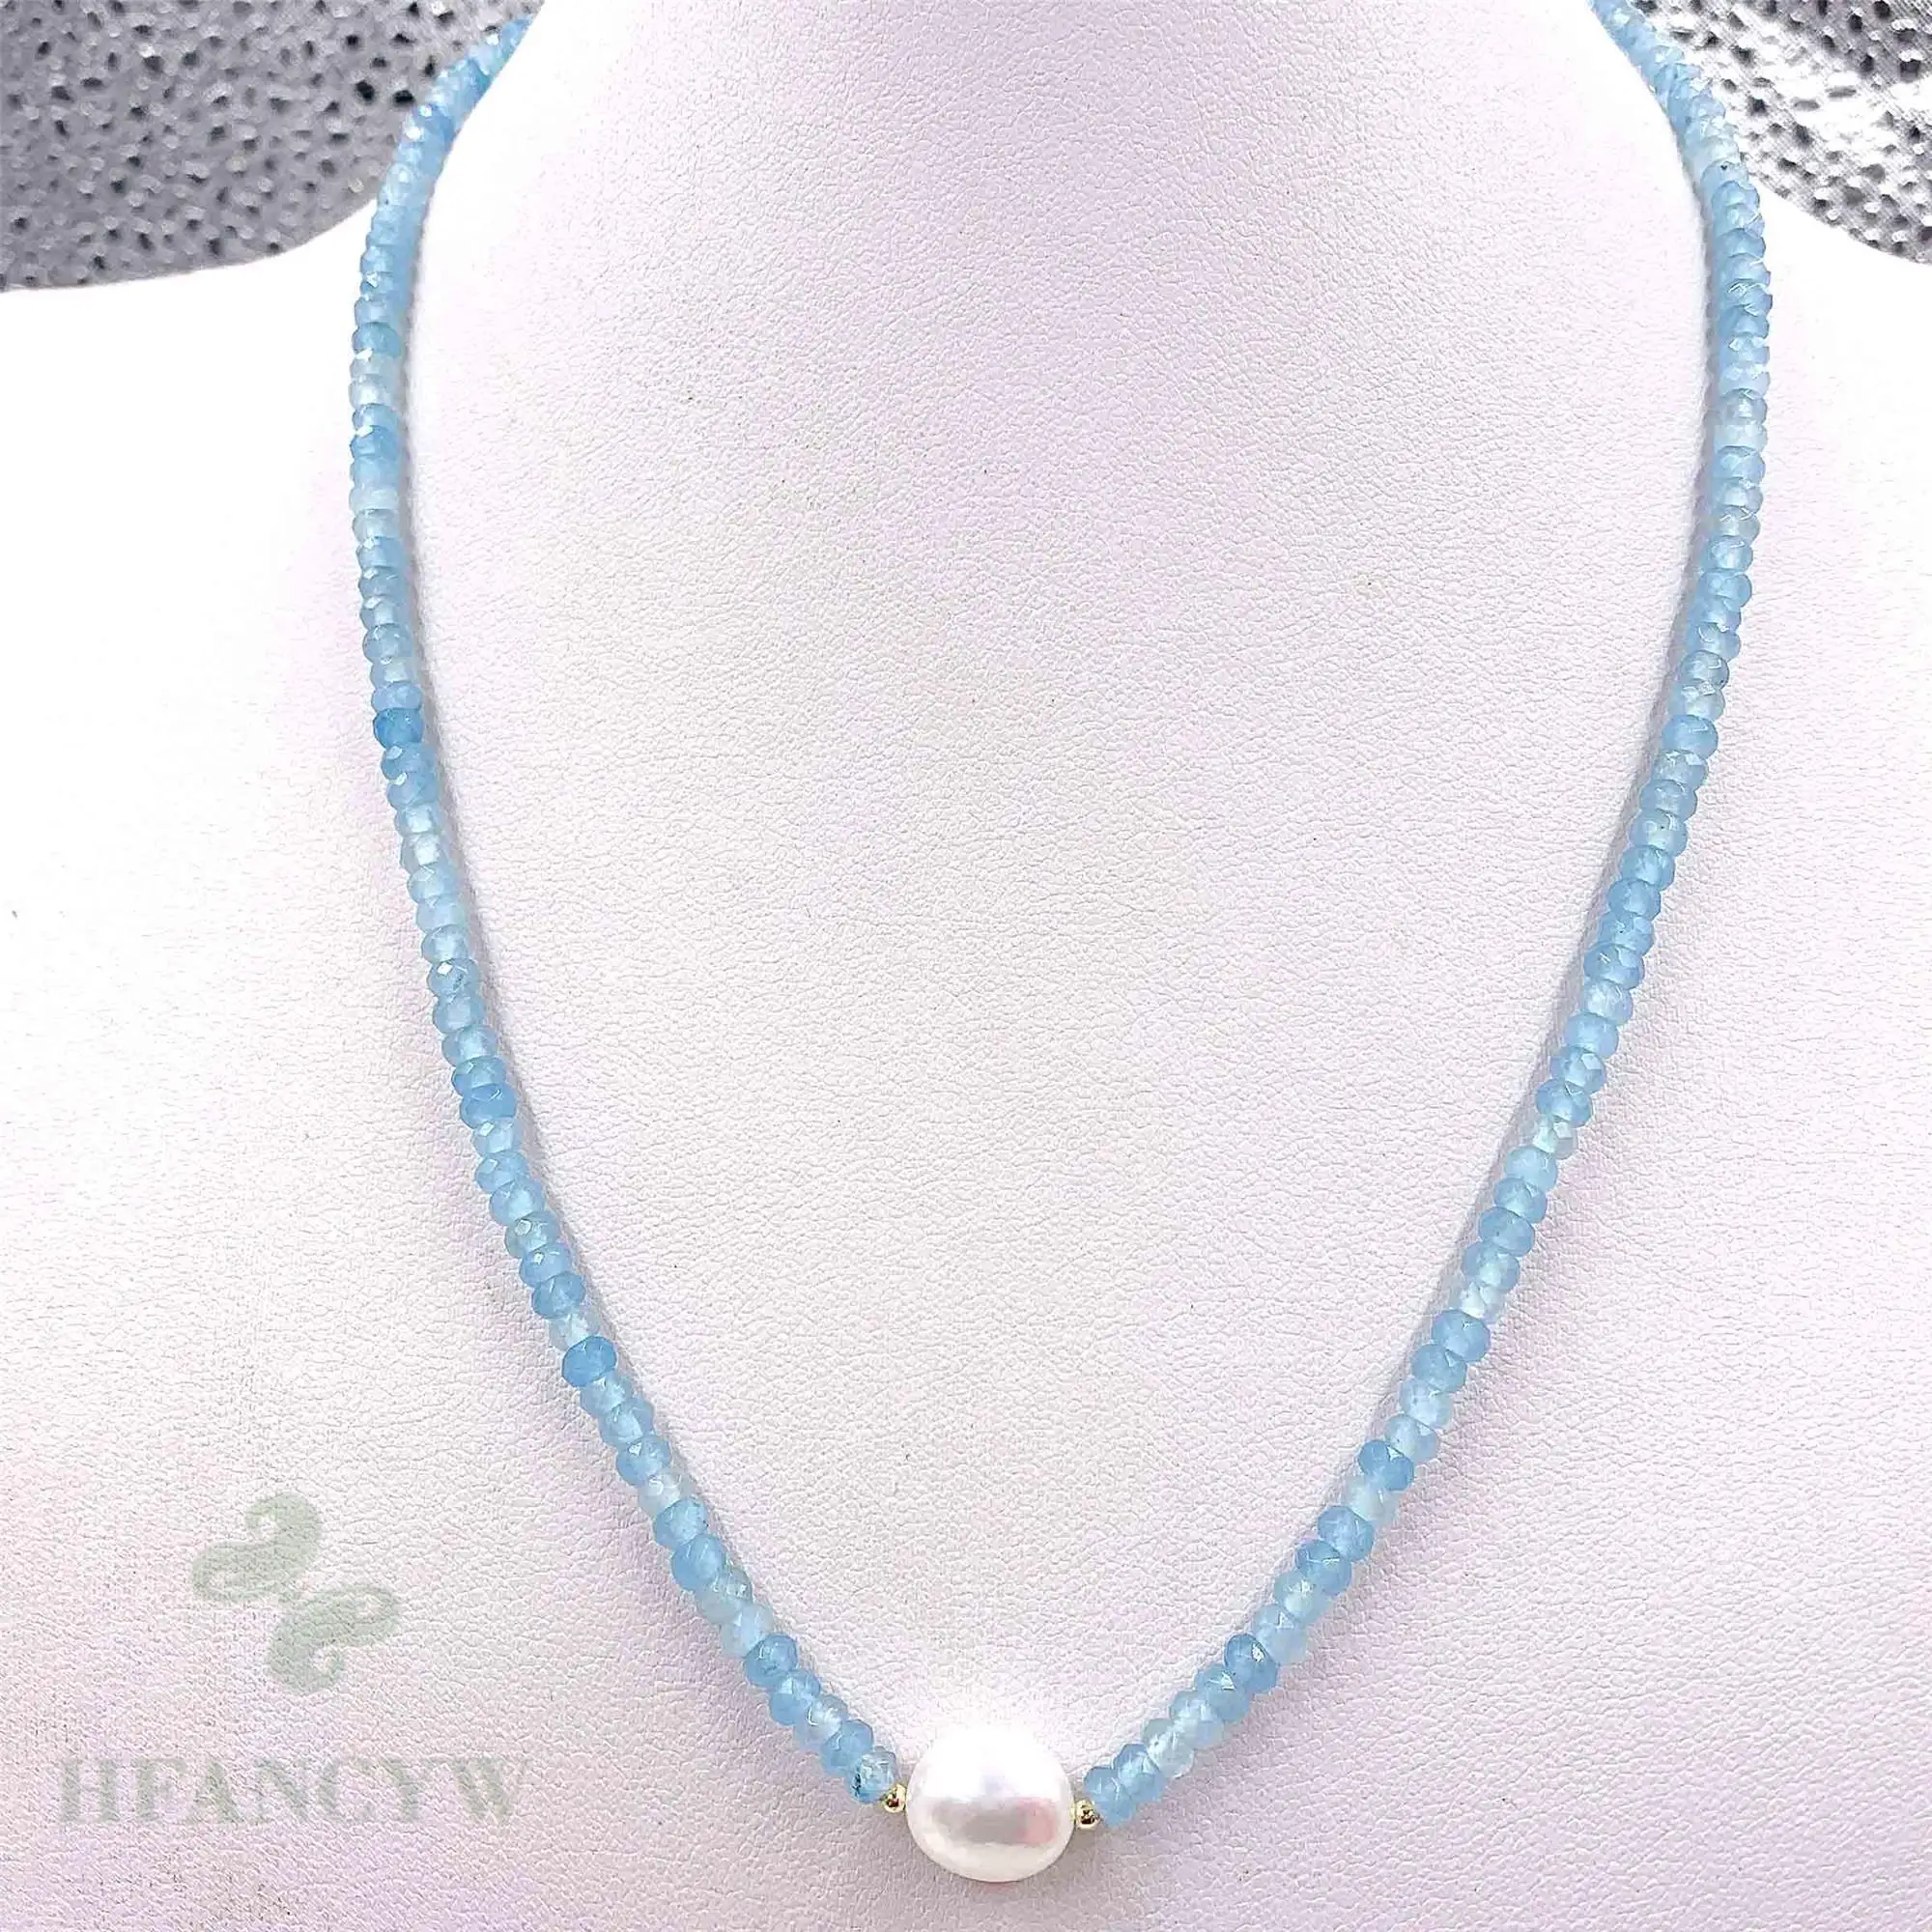 Blue Chalcedony White Baroque Pearl Necklace 18 inches Diy Aurora Chain 